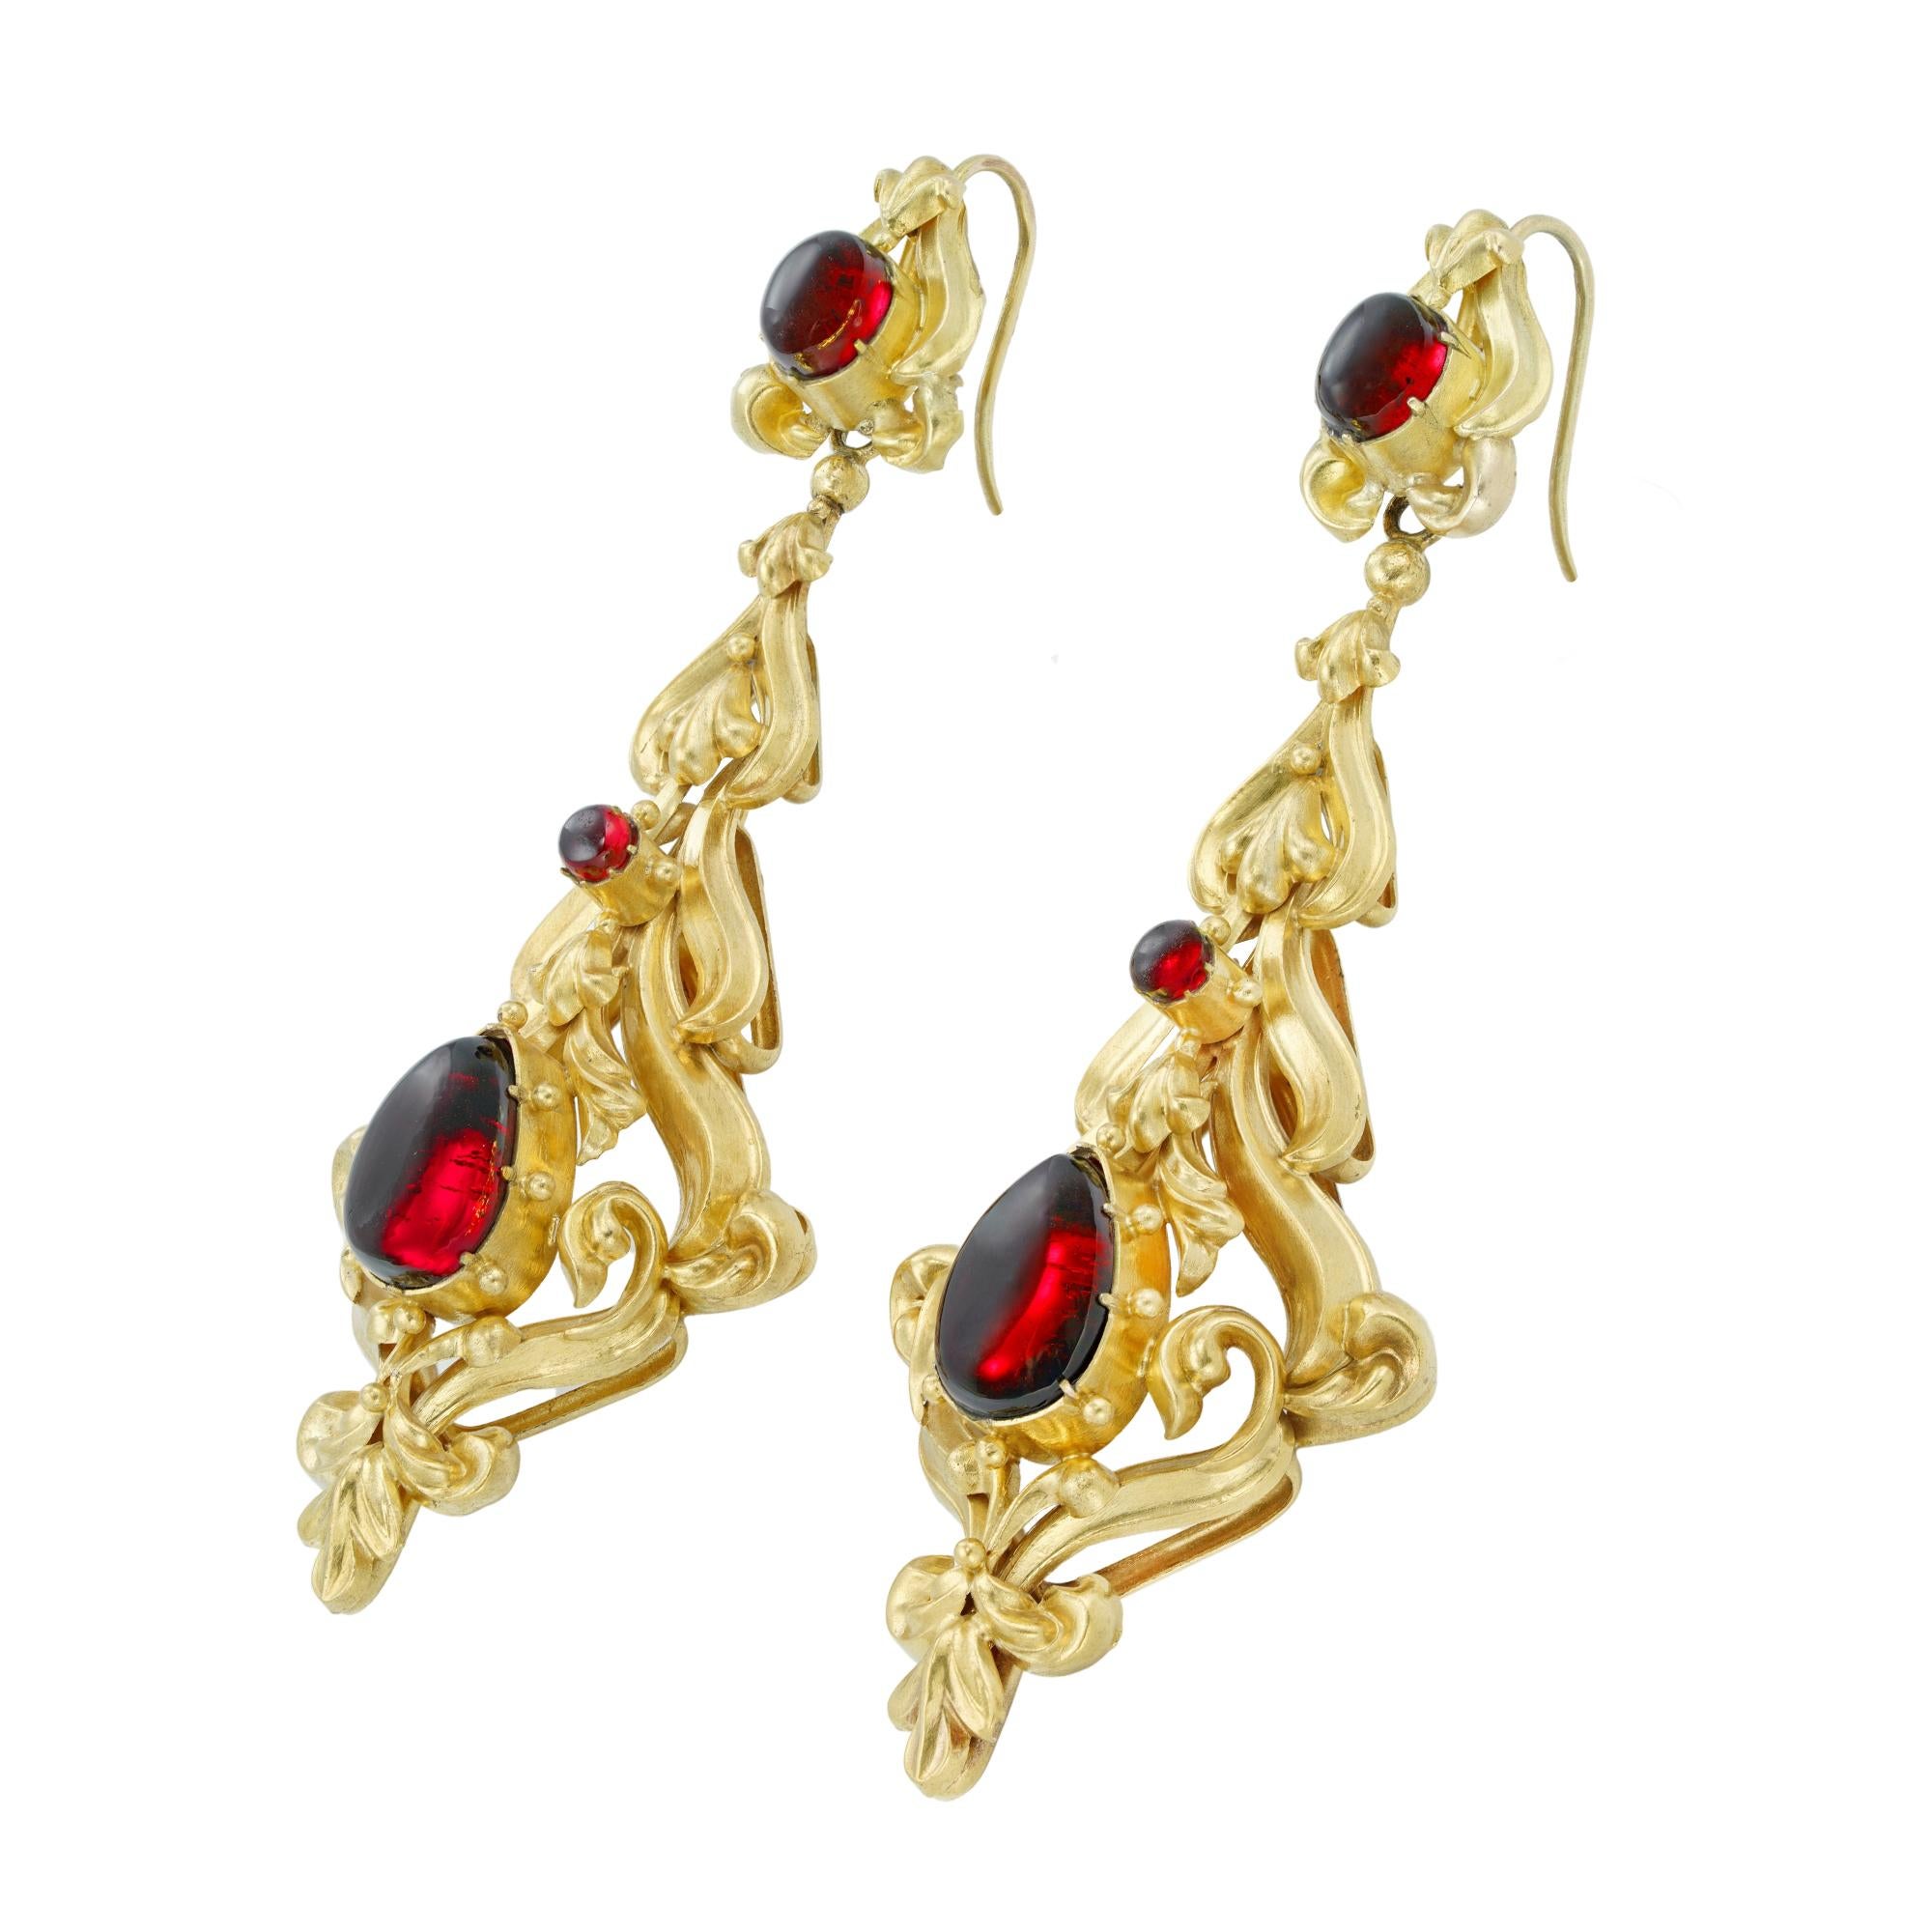 A pair of mid-Victorian garnet and gold earrings, each earring with an ornate scrolled mount, set with and oval, a round and a pear-shaped cabochon garnets, with gold wire fittings, all mounted in 15 carat gold, bearing French Assay marks, circa